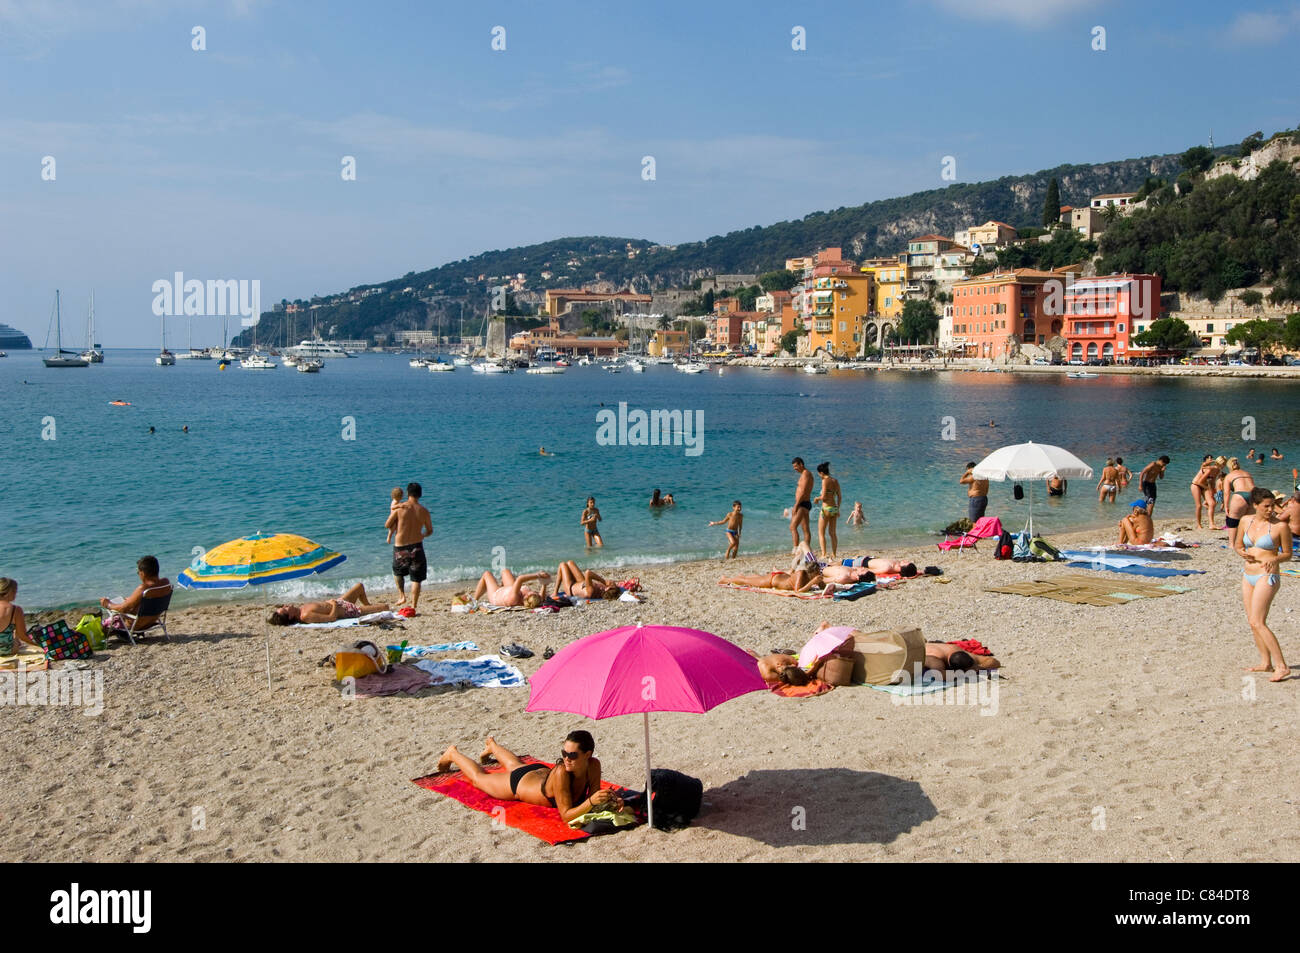 Villefranche sur Mer, the beach and holidaymakers, South of France Stock Photo